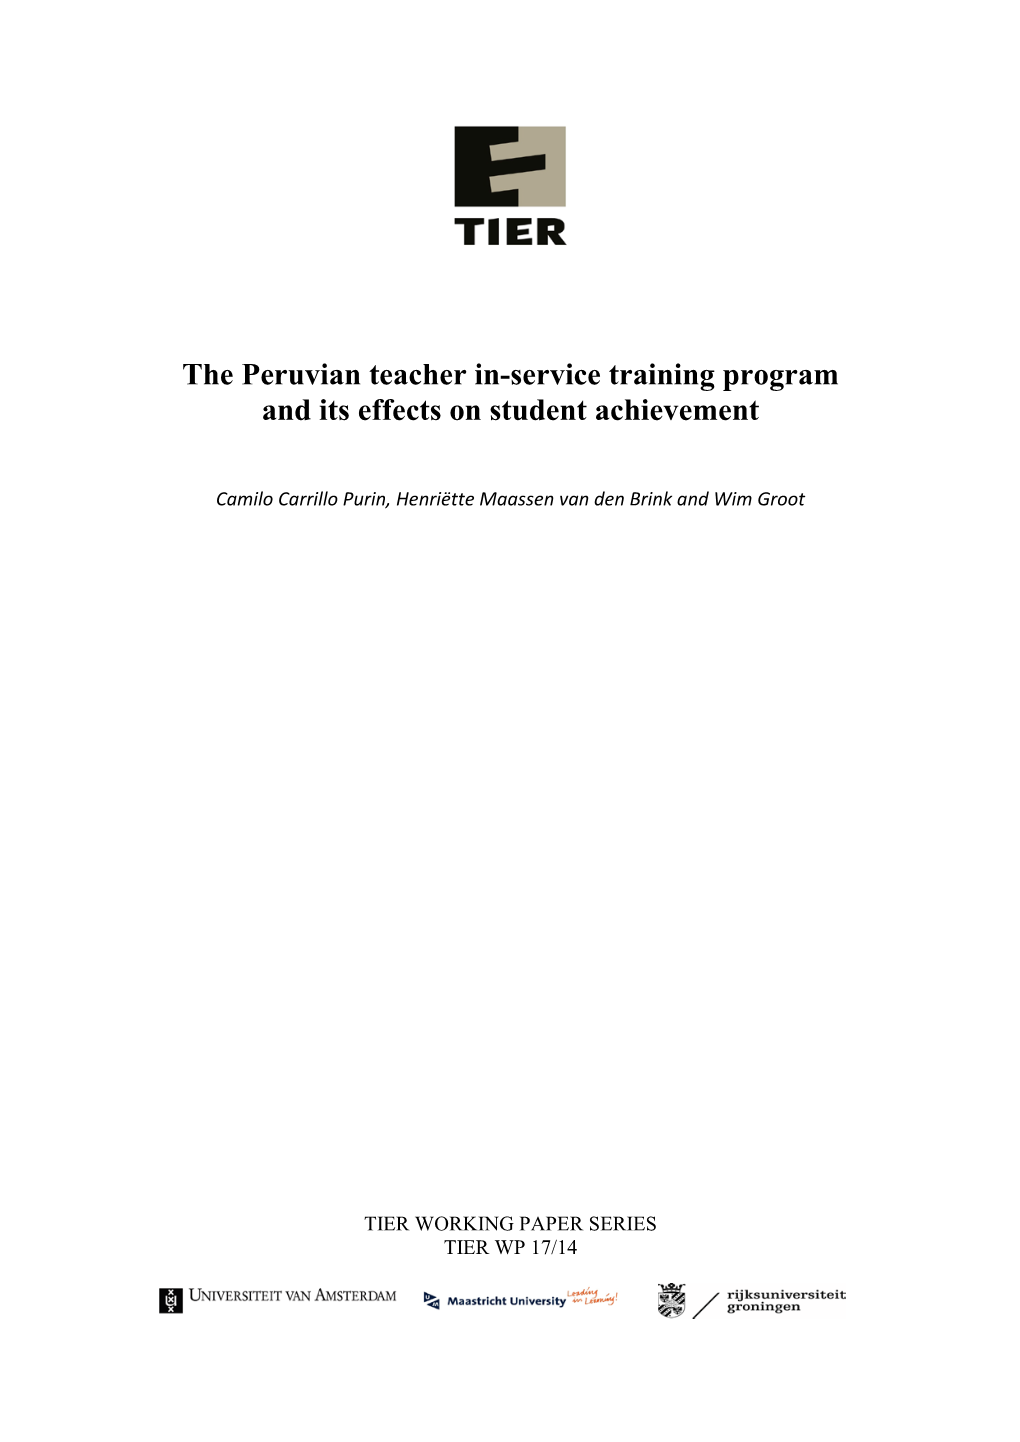 The Peruvian Teacher In-Service Training Program and Its Effects on Student Achievement